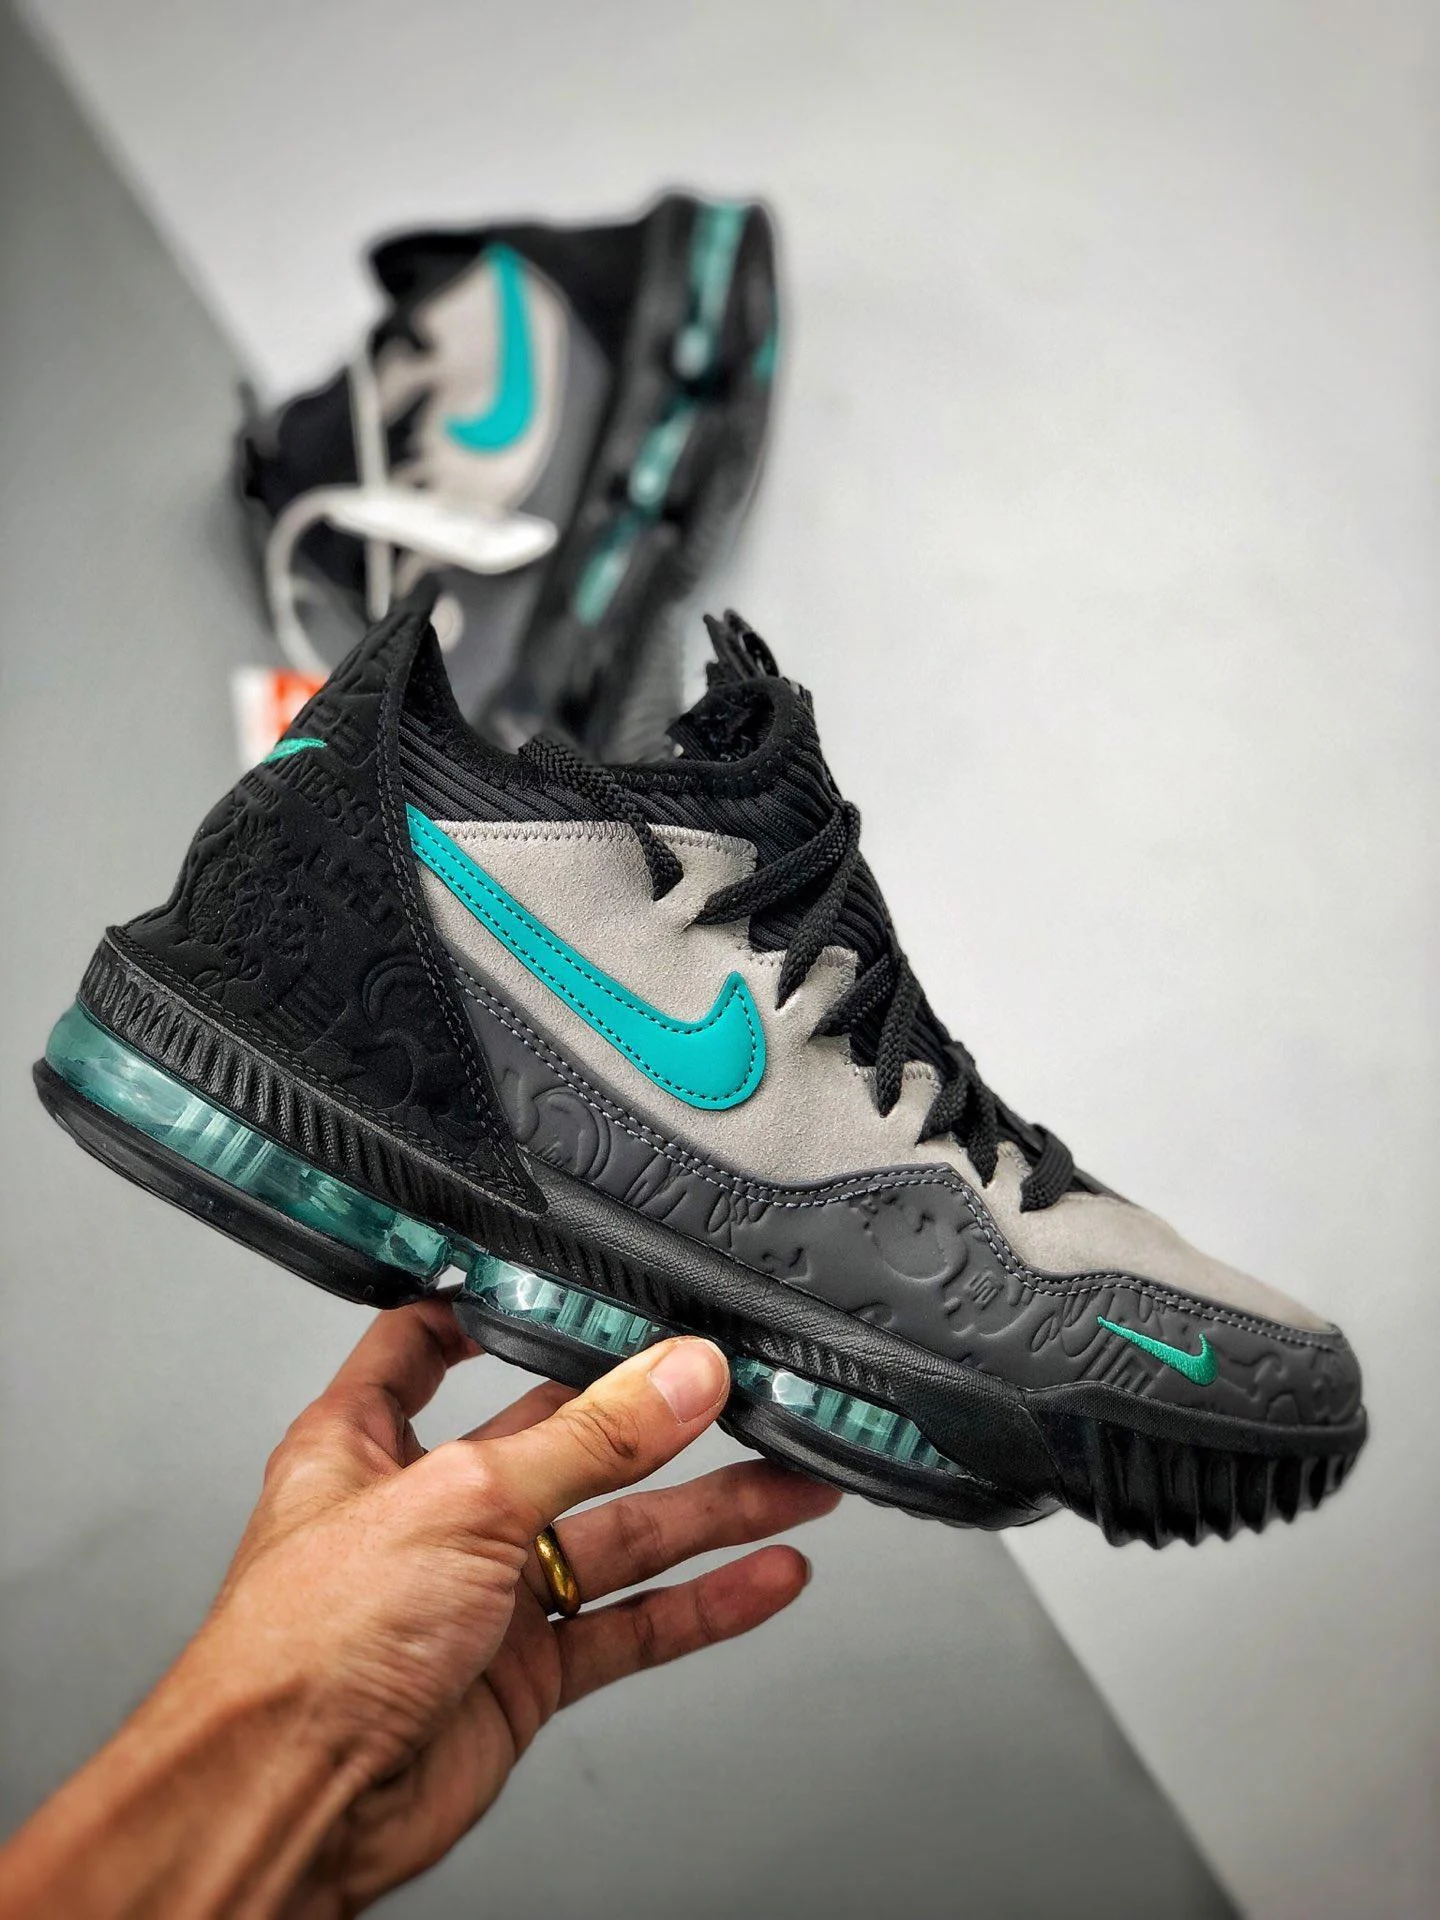 atmos x Nike LeBron 16 Low Clear Jade CD9471-003 For Sale